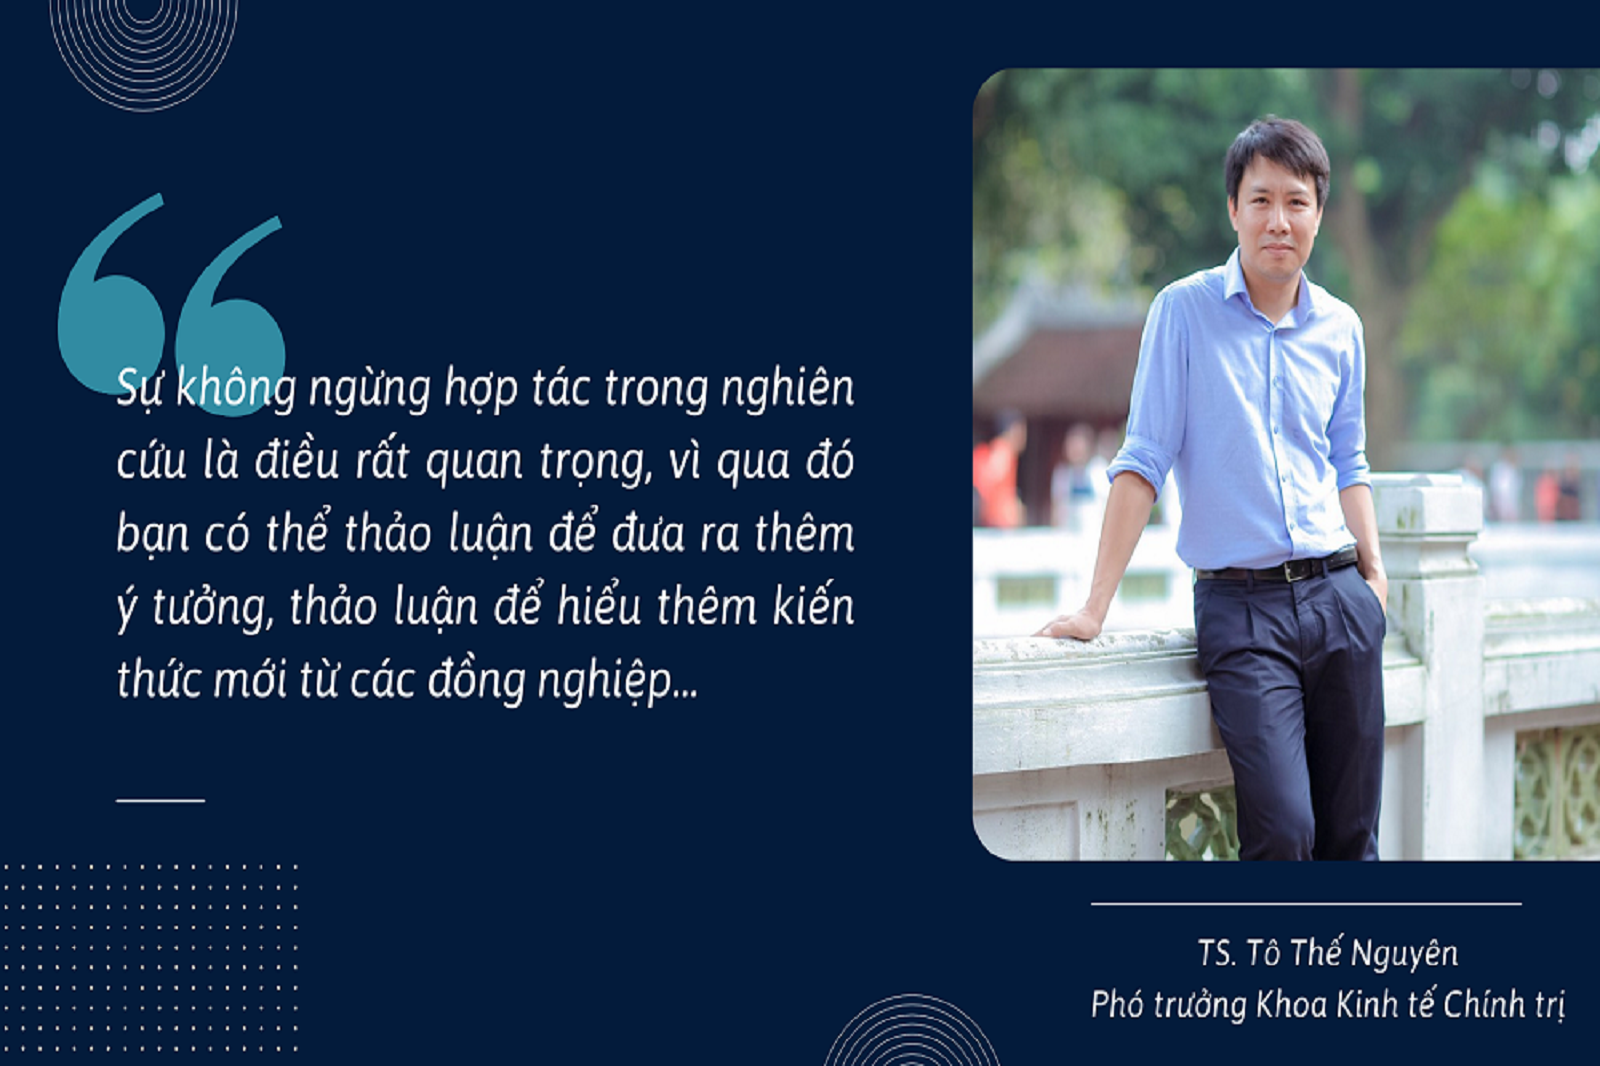 Assoc. Prof. Dr. To The Nguyen with a passion for research on agricultural economics and the livelihoods of Vietnamese farmers